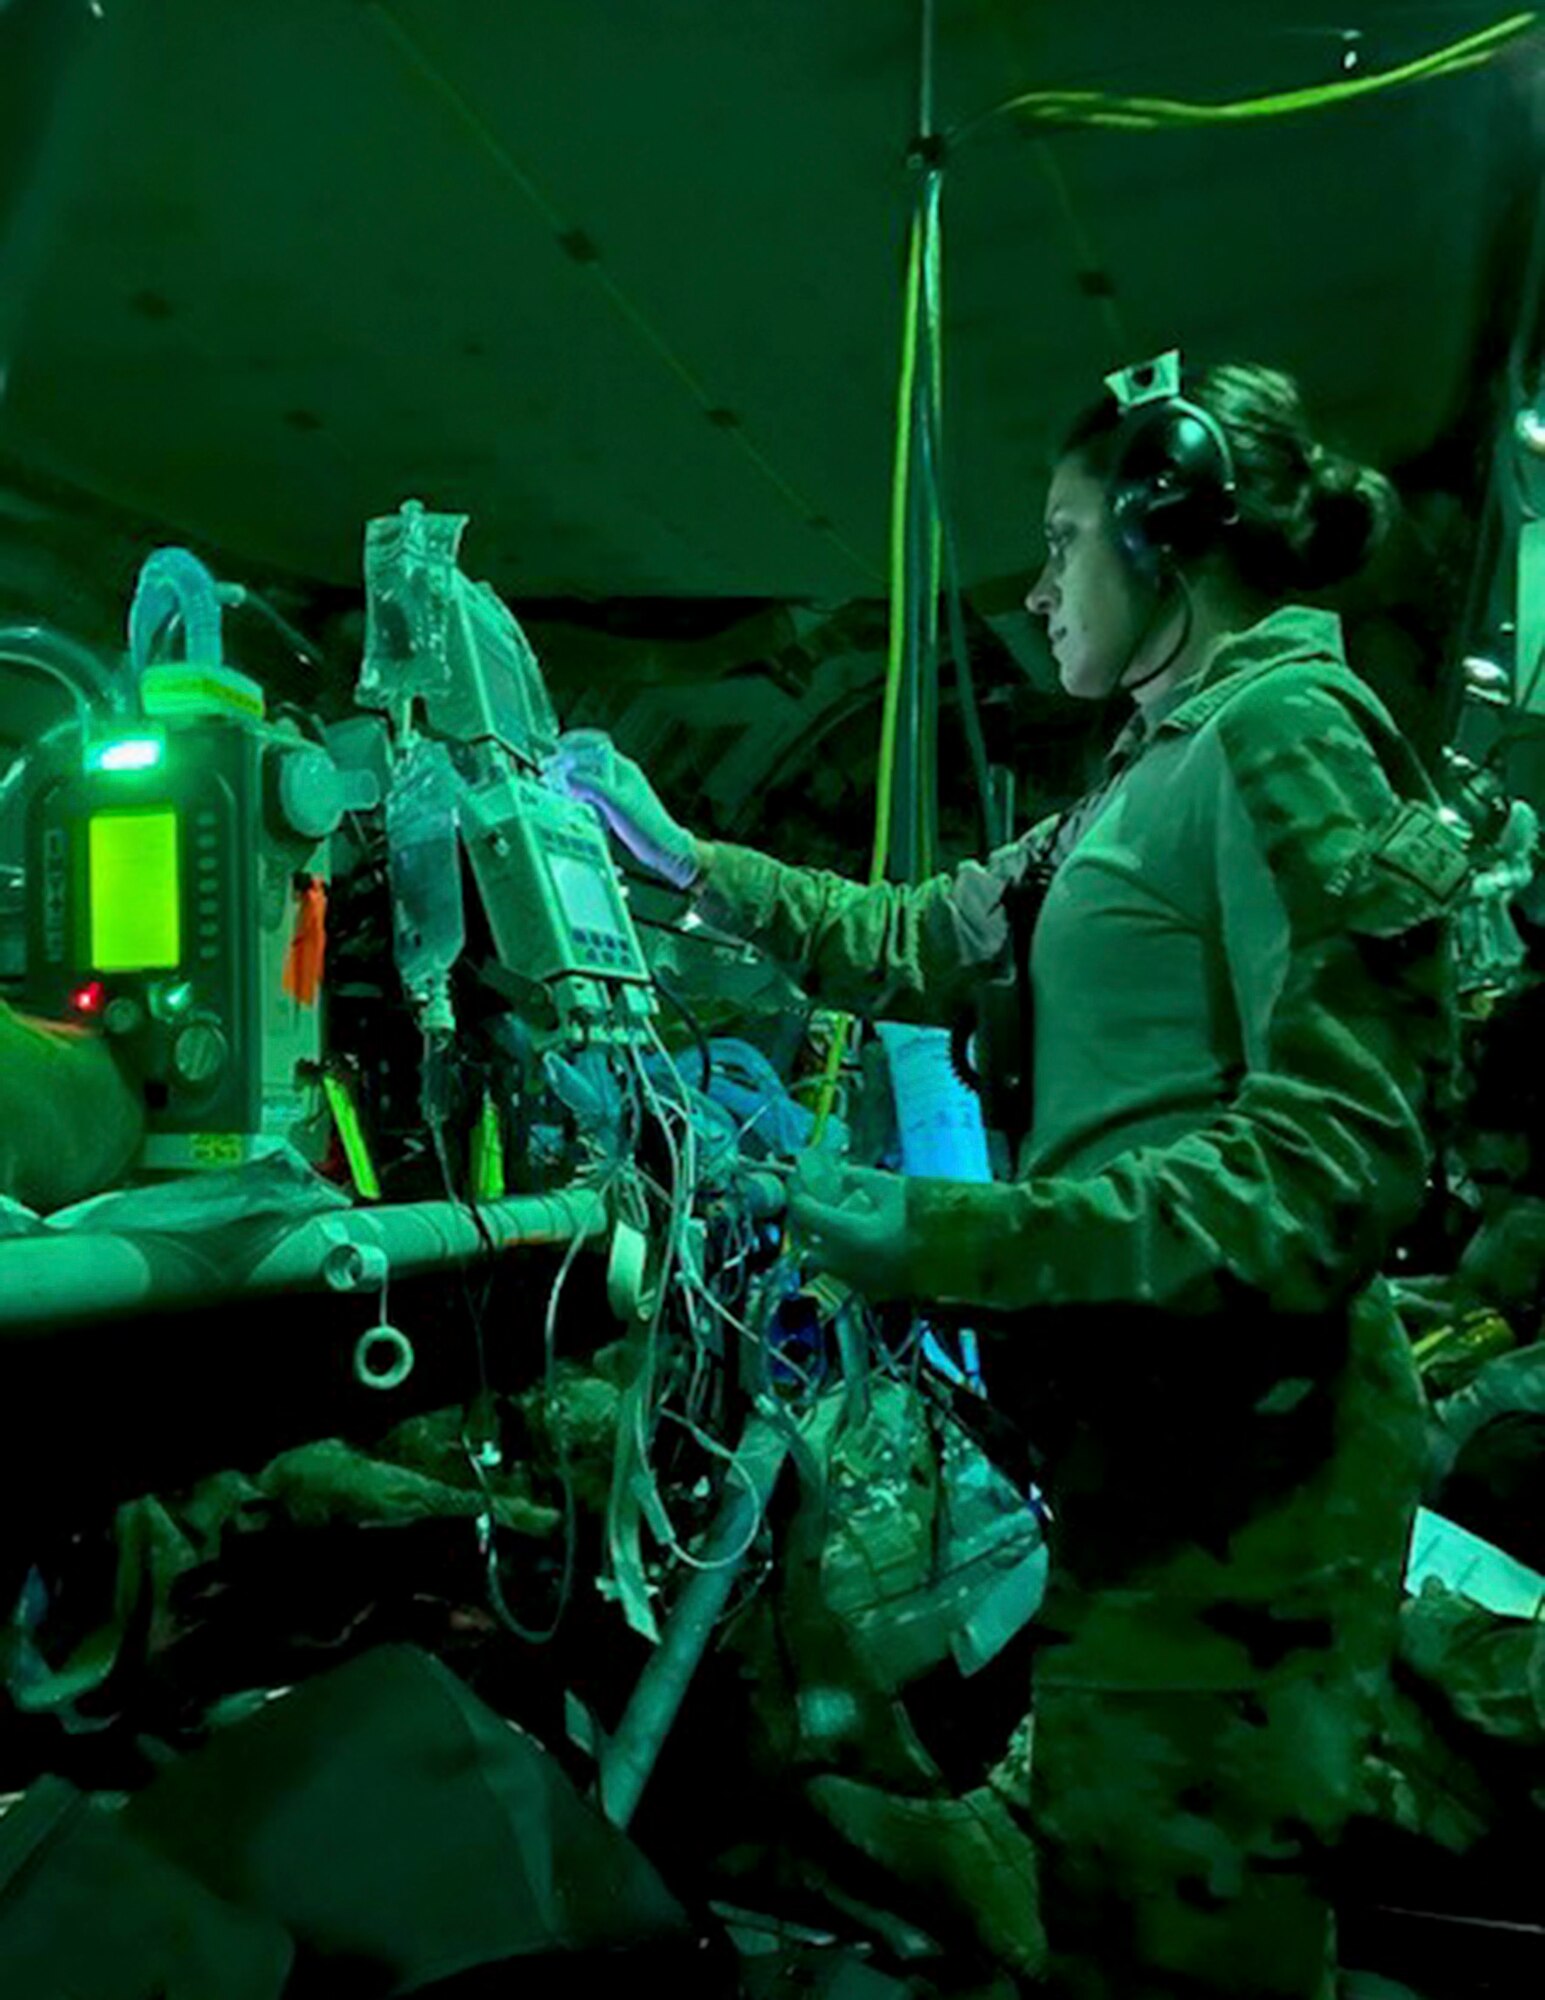 U.S. Air Force Capt. Katie Lunning, center, 379th Expeditionary Aeromedical Evacuation Squadron, critical care air transport team registered nurse, checks equipment on a C-17 Globemaster III in Kabul, Afghanistan, Aug. 20, 2021.